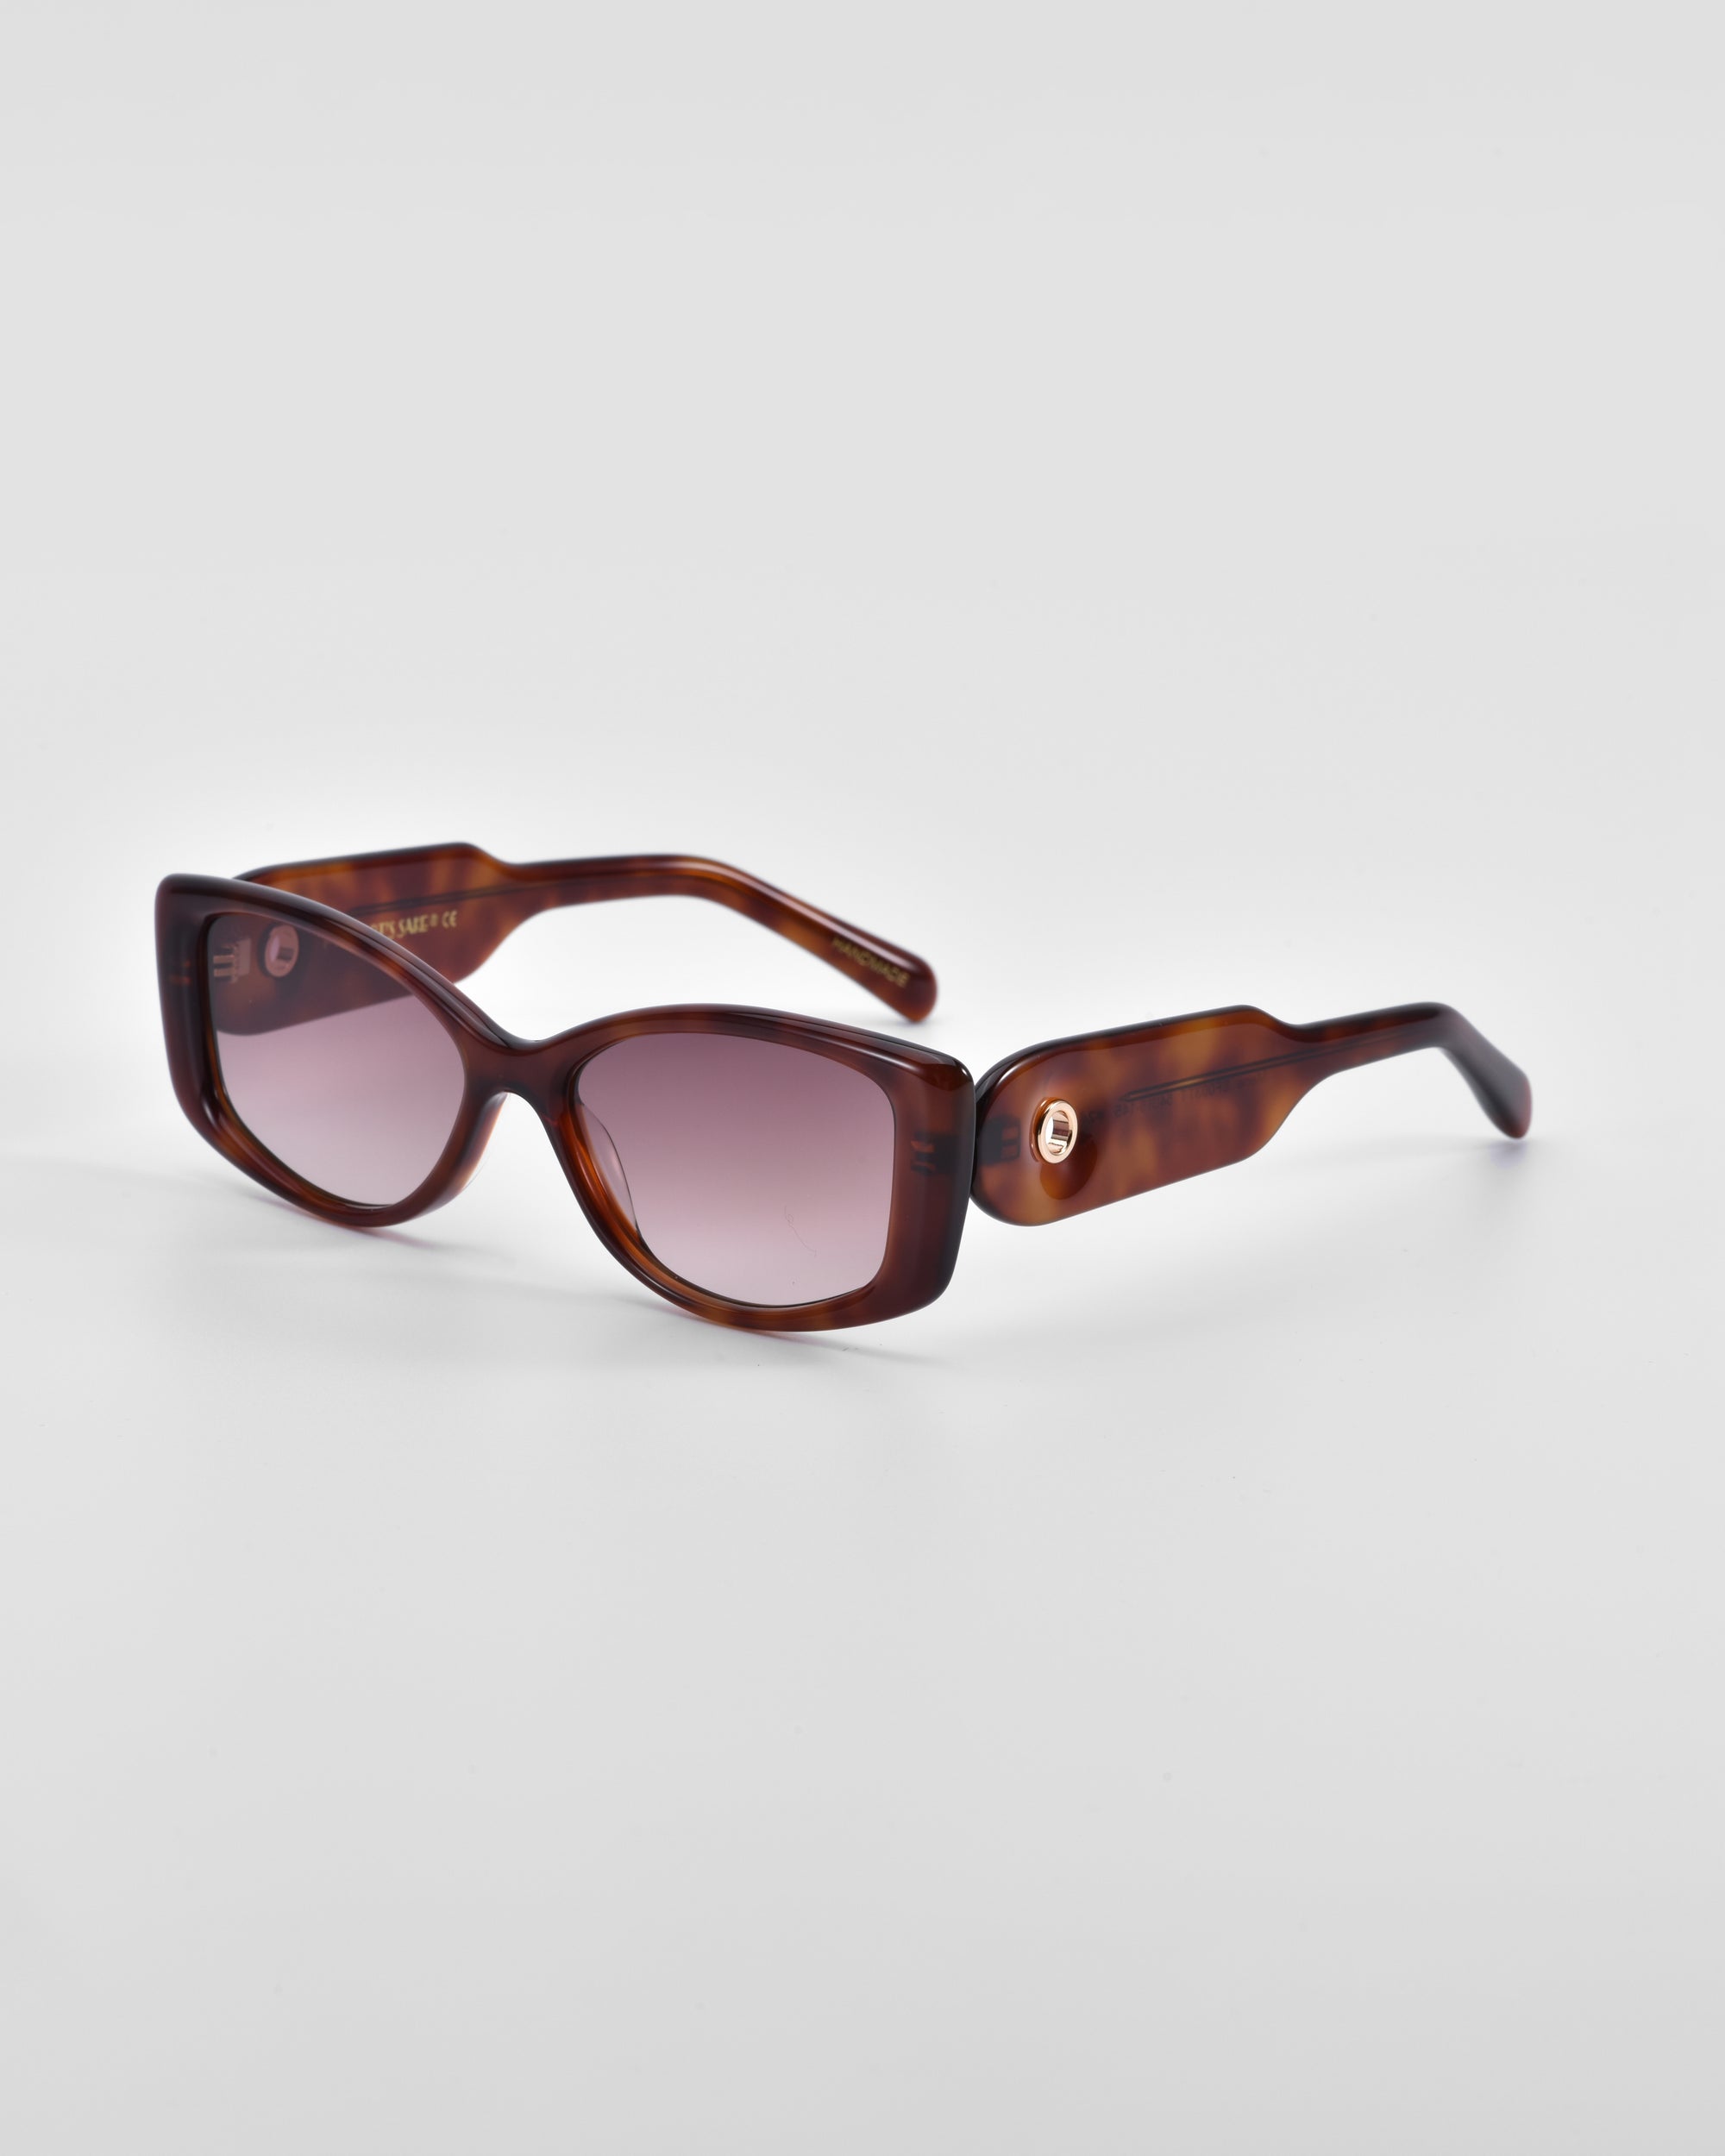 A pair of Mene by For Art&#39;s Sake® luxury tortoiseshell sunglasses with rectangular lenses tinted in a gradient from dark to light purple. The thick arms feature subtle 18 karat gold accents near the hinges, enhancing their refined elegance against a plain white background.